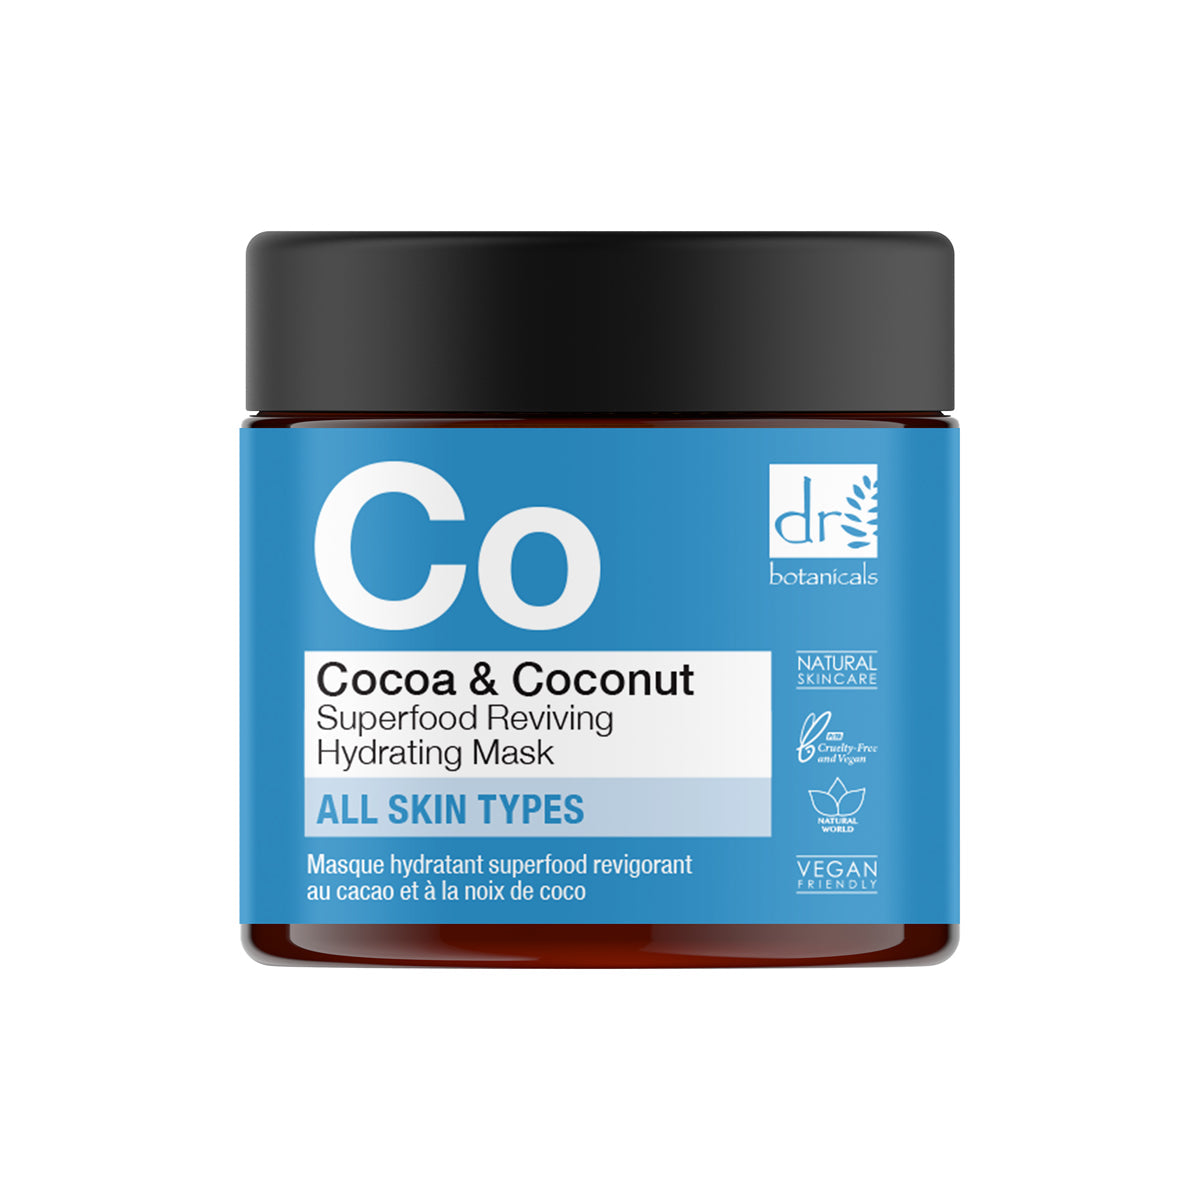 Cocoa & Coconut Superfood Reviving Hydrating Mask 60ml.